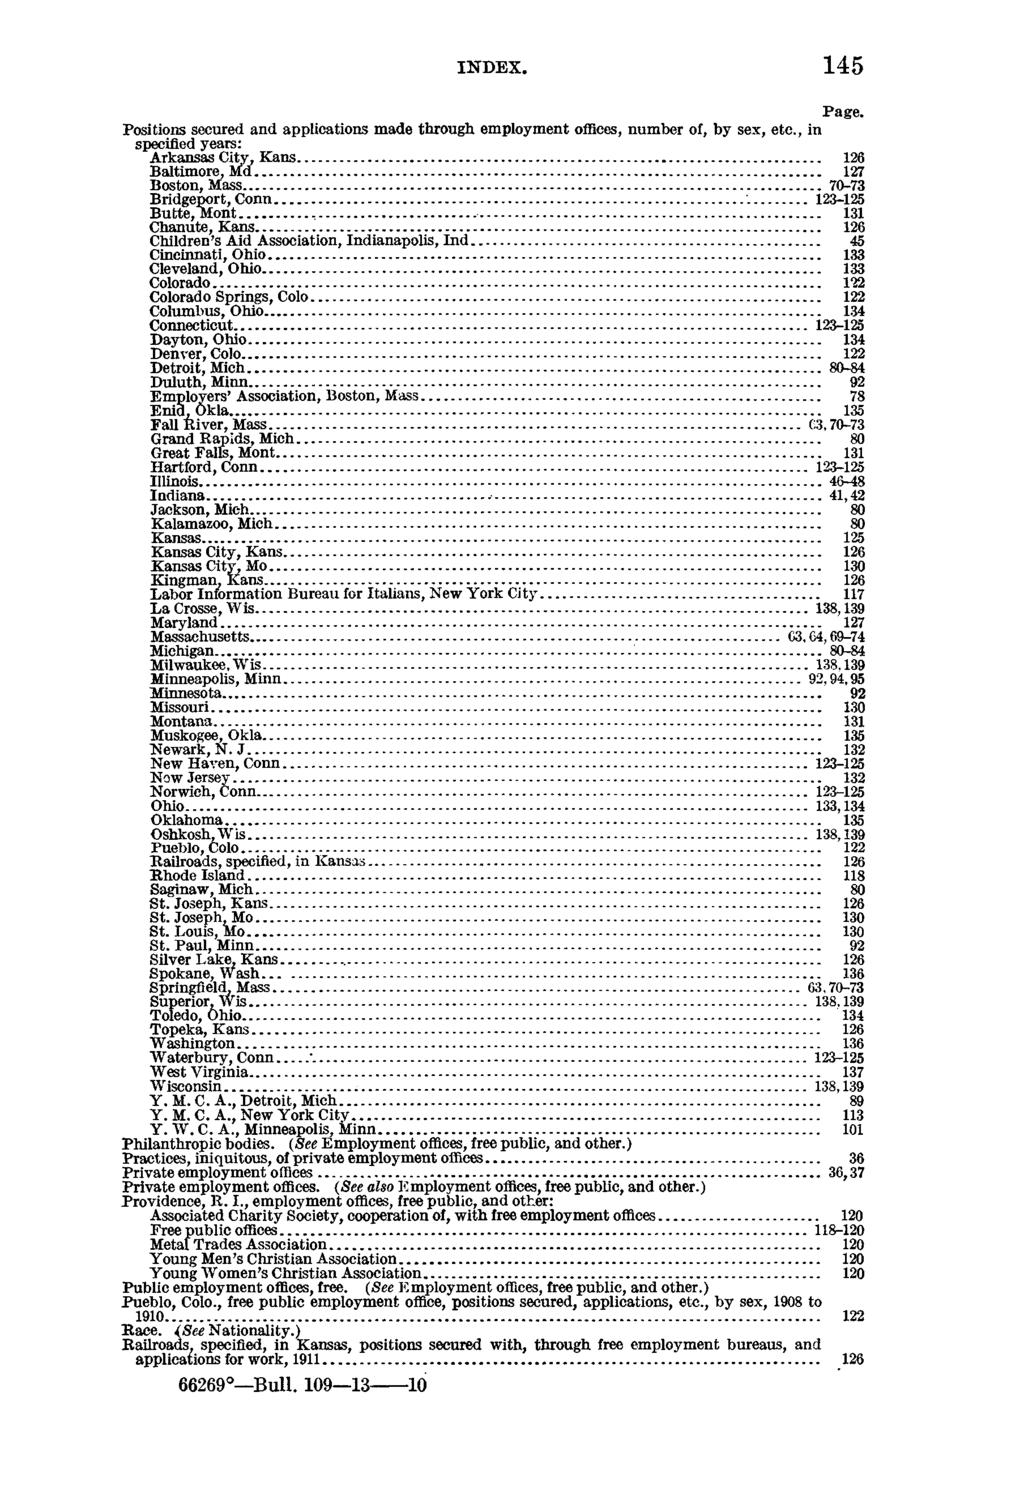 INDEX. 145 Page. Positions secured and applications made through employment offices, number of, by sex, etc., in specified years: Arkansas City, Kans... 126 Baltimore, Md... 127 Boston, Mass.